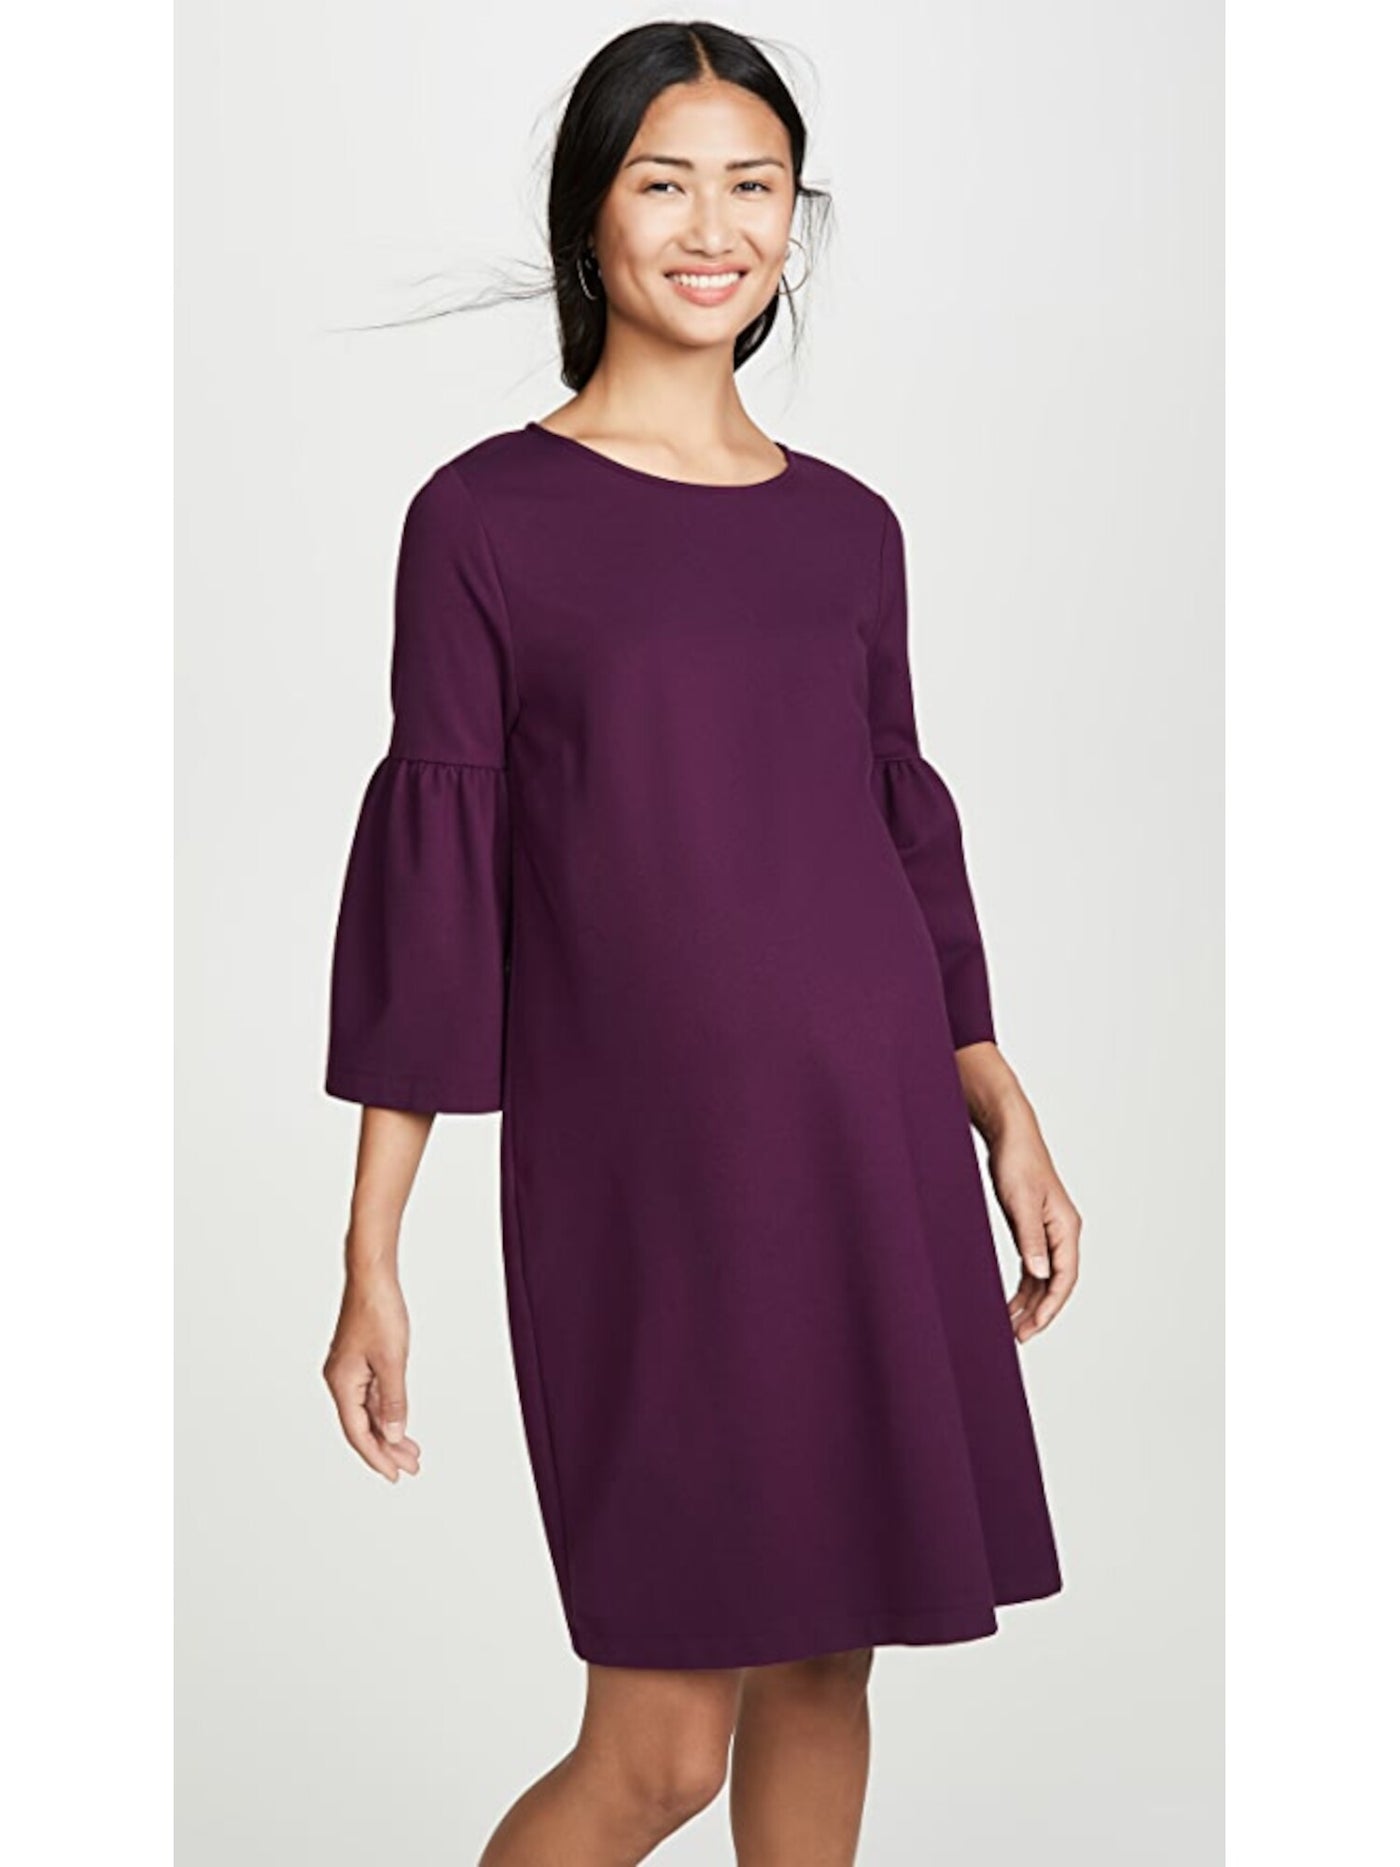 INGRID & ISABEL Womens Purple Knit Darted Bell Sleeve Jewel Neck Above The Knee Shift Dress Maternity L